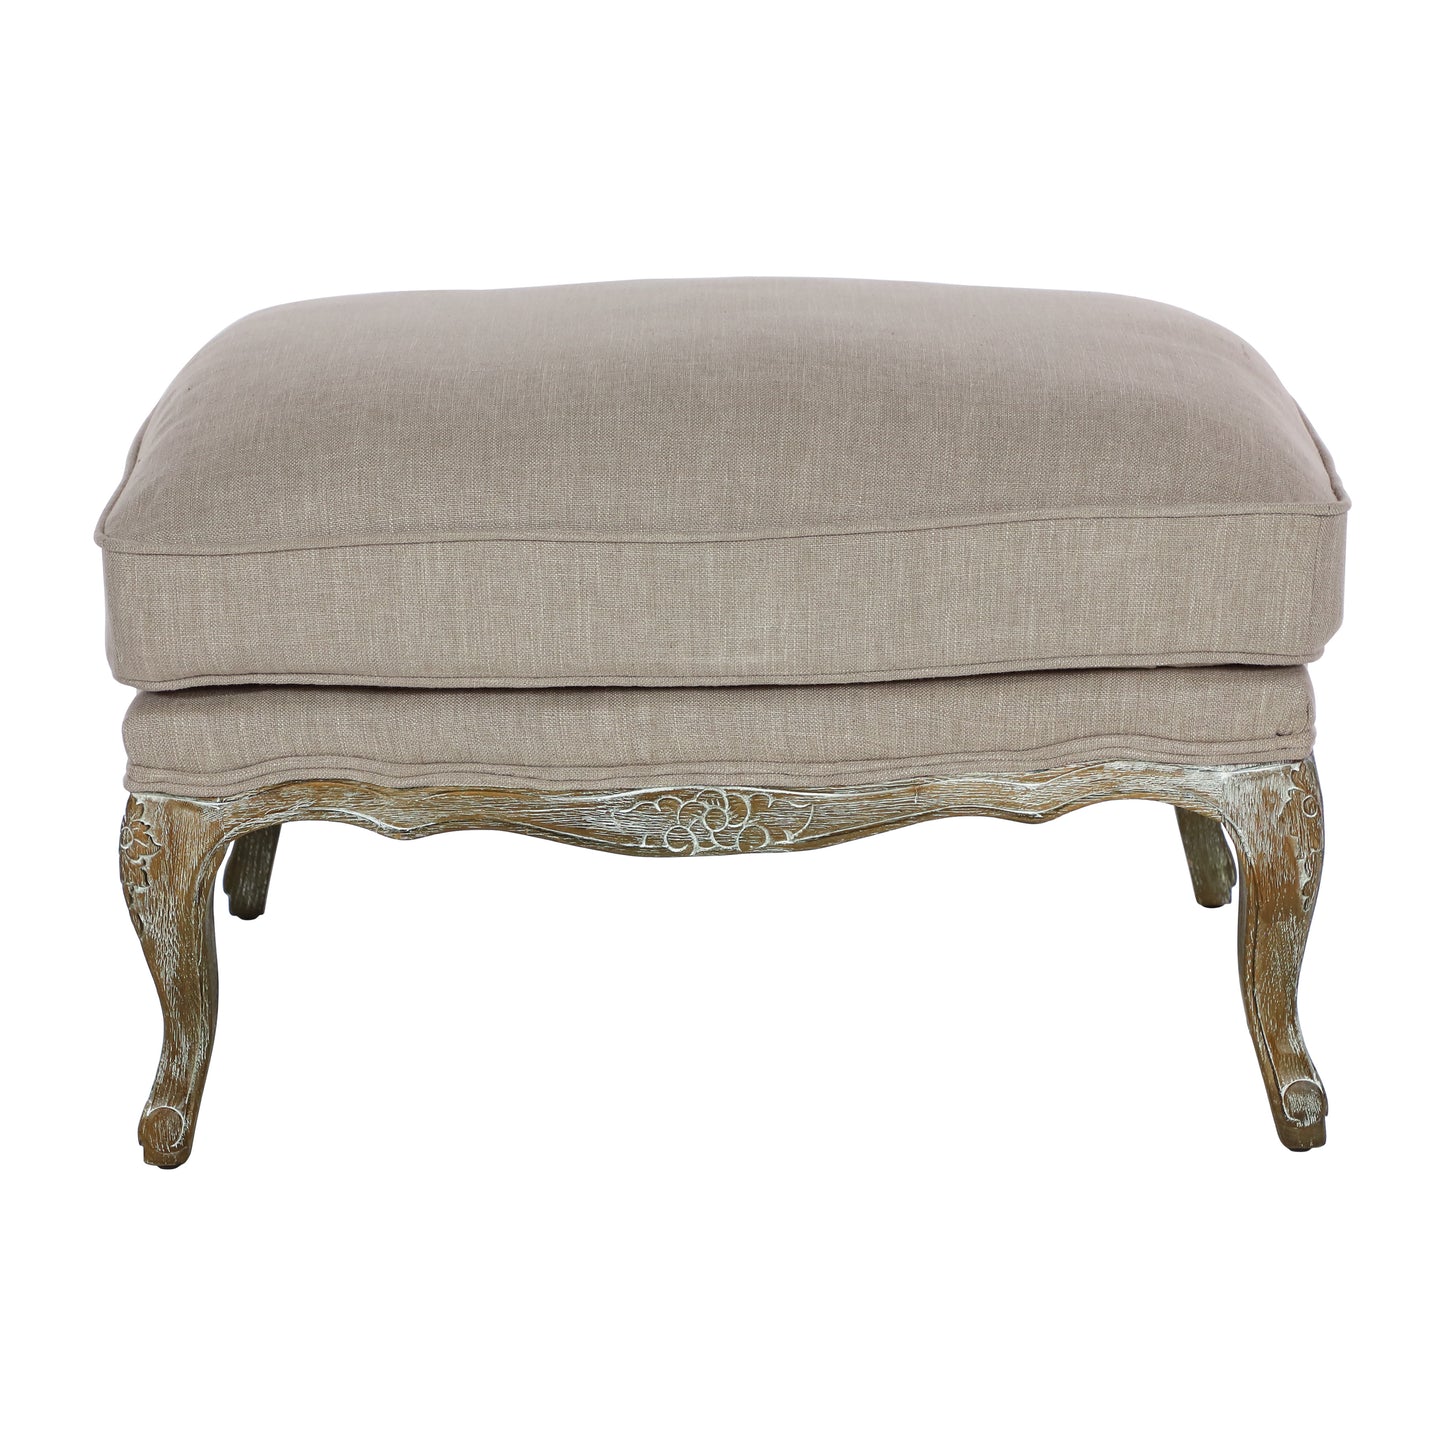 Living Room Accent Ottoman Wood Frame Gray Weathered Finish Textured Fabric Upholstery Foam Seat Cushion